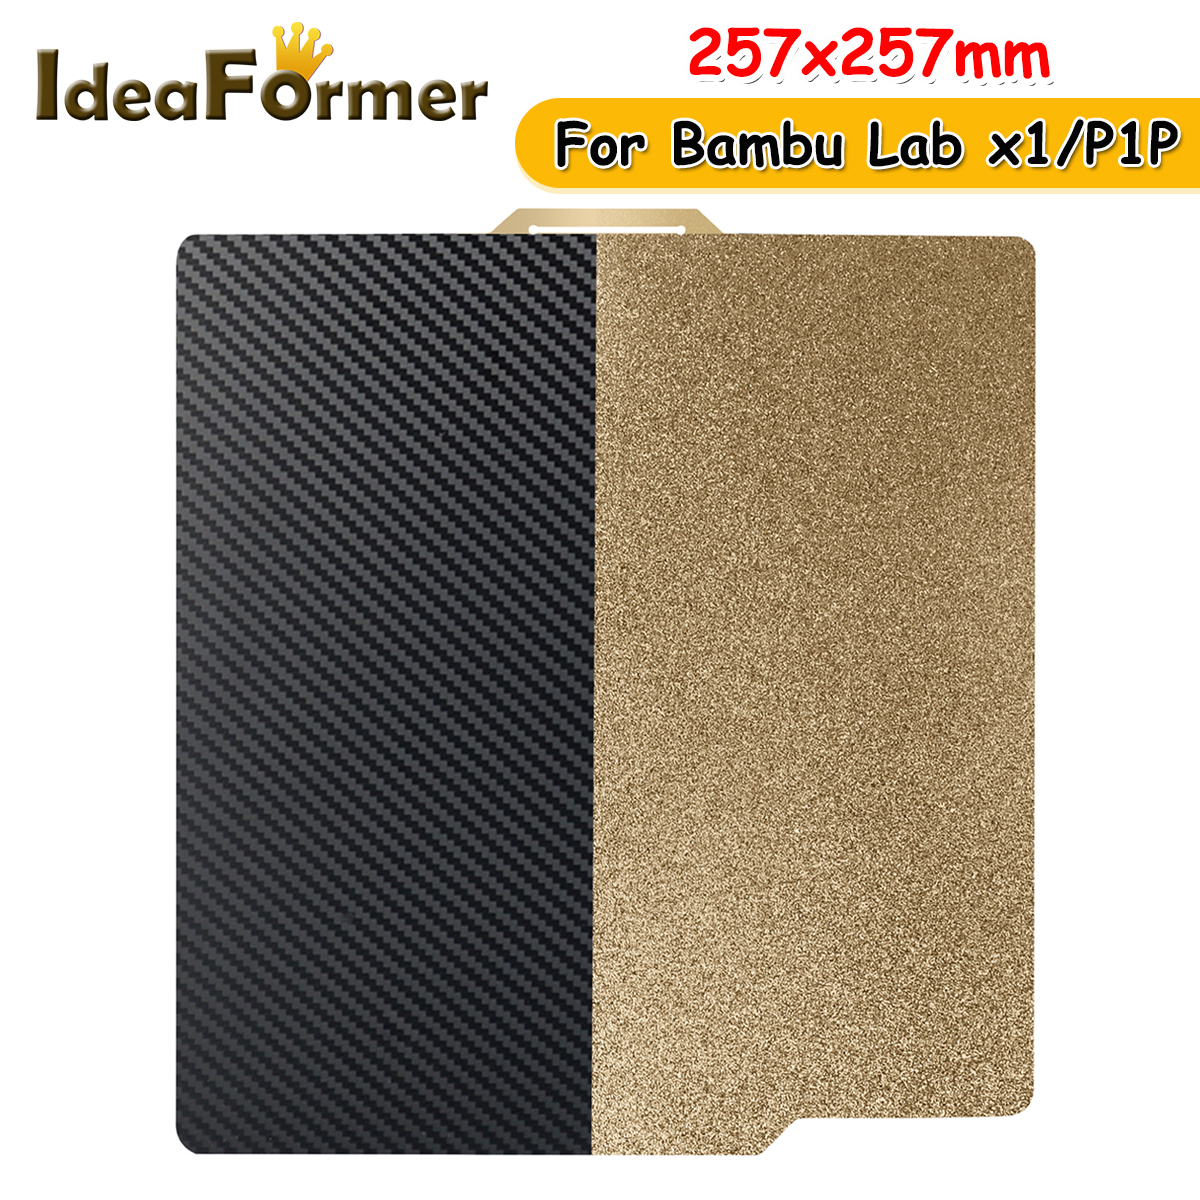 IdeaFormer Upgrade Double Sided PET+PEI Build Plate Spring Steel Sheet 3D Printer Heat Bed for Bambu Lab X1